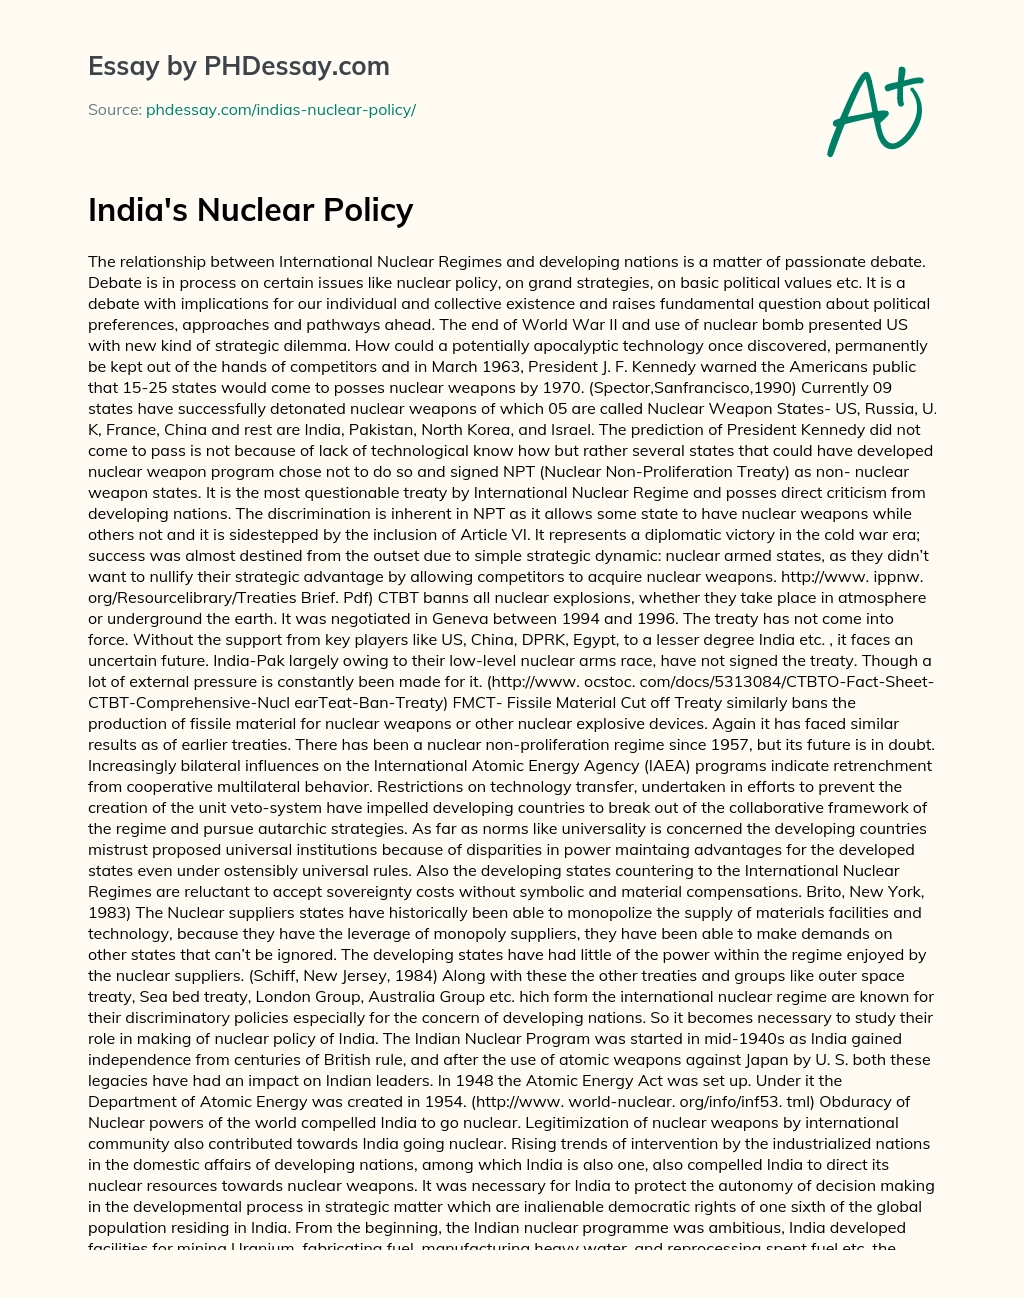 India’s Nuclear Policy essay